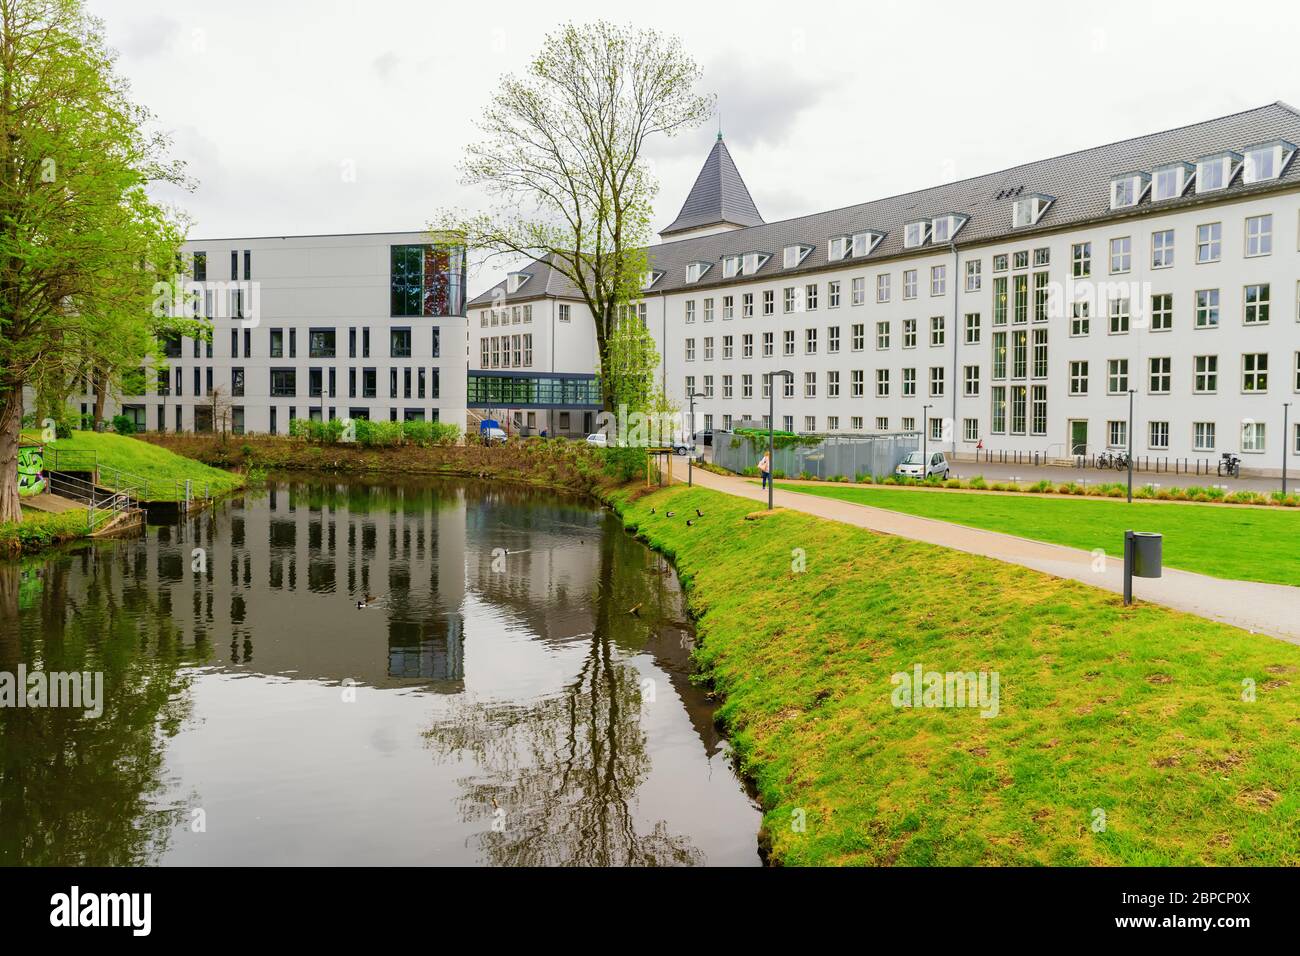 Moers, Germany - April 26, 2019: city hall of Moers. Moers is a district belonging city in the Lower Rhine Region of Germany Stock Photo